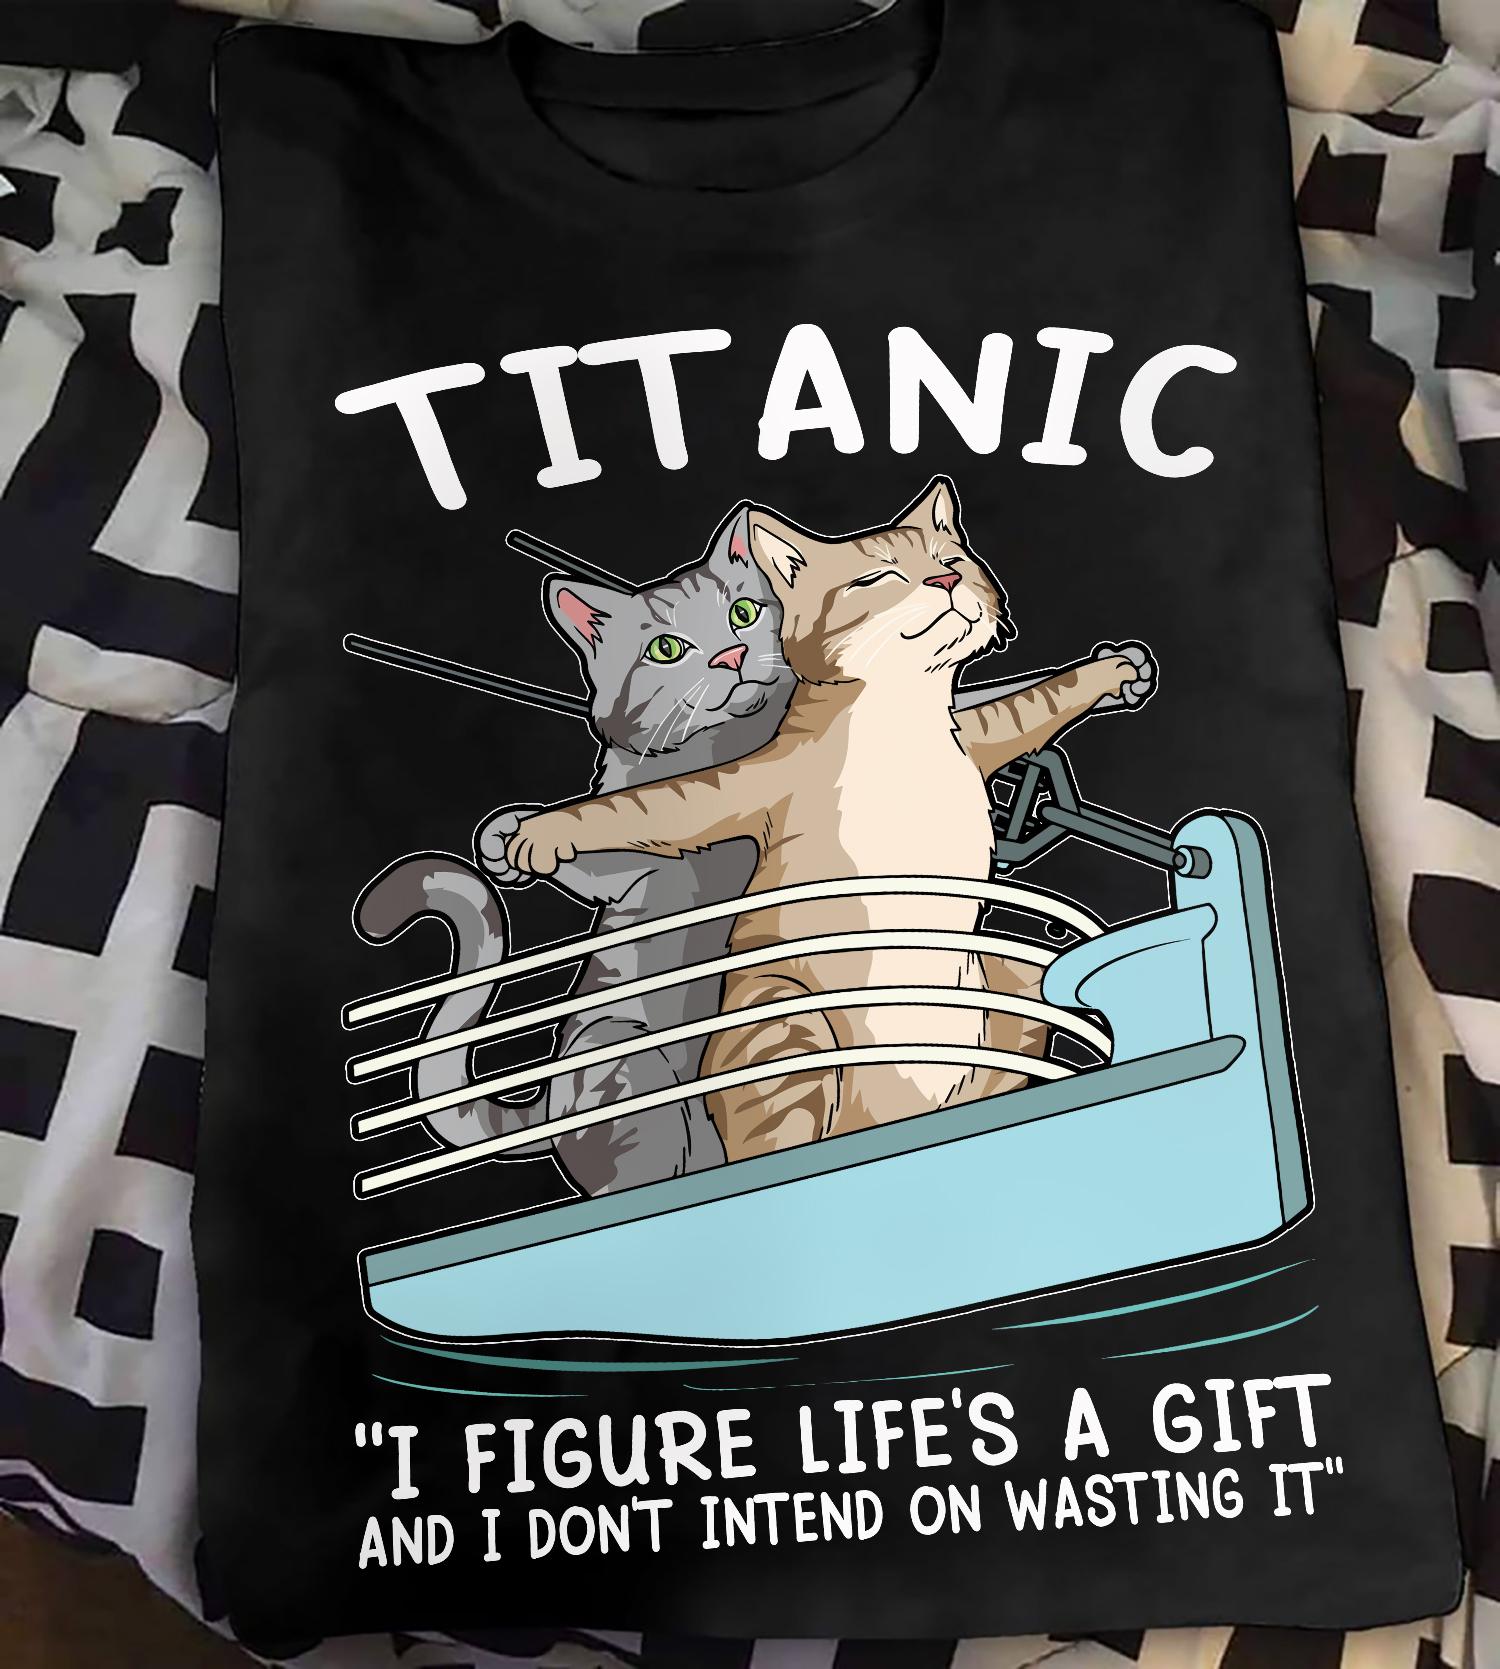 Titanic Cats - Titanic i figure life's a gift and i don't intend on wasting it